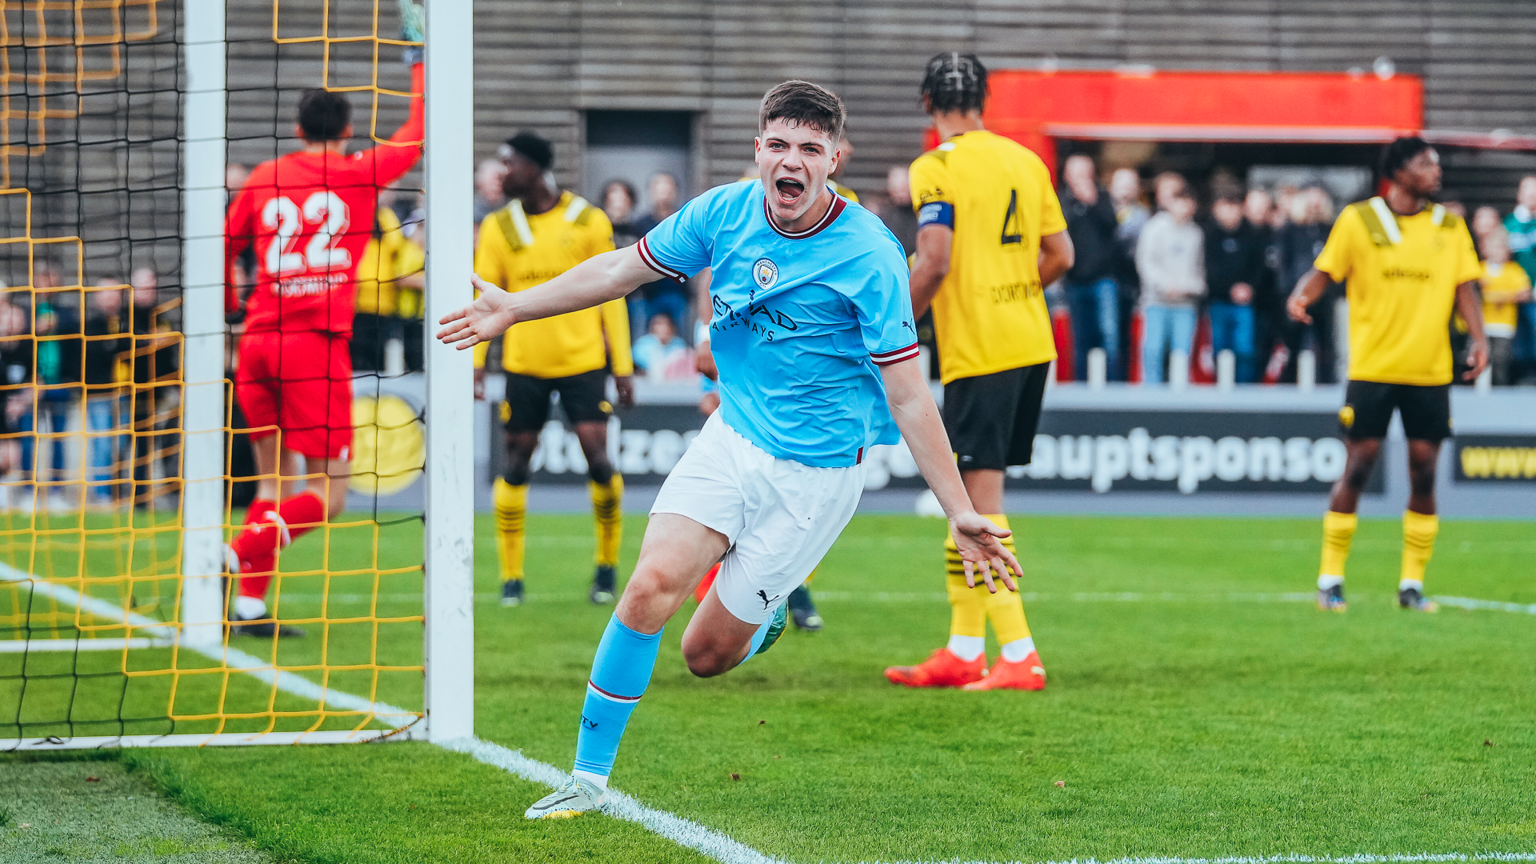 City qualify for UEFA Youth League last-16 after pulsating Dortmund draw